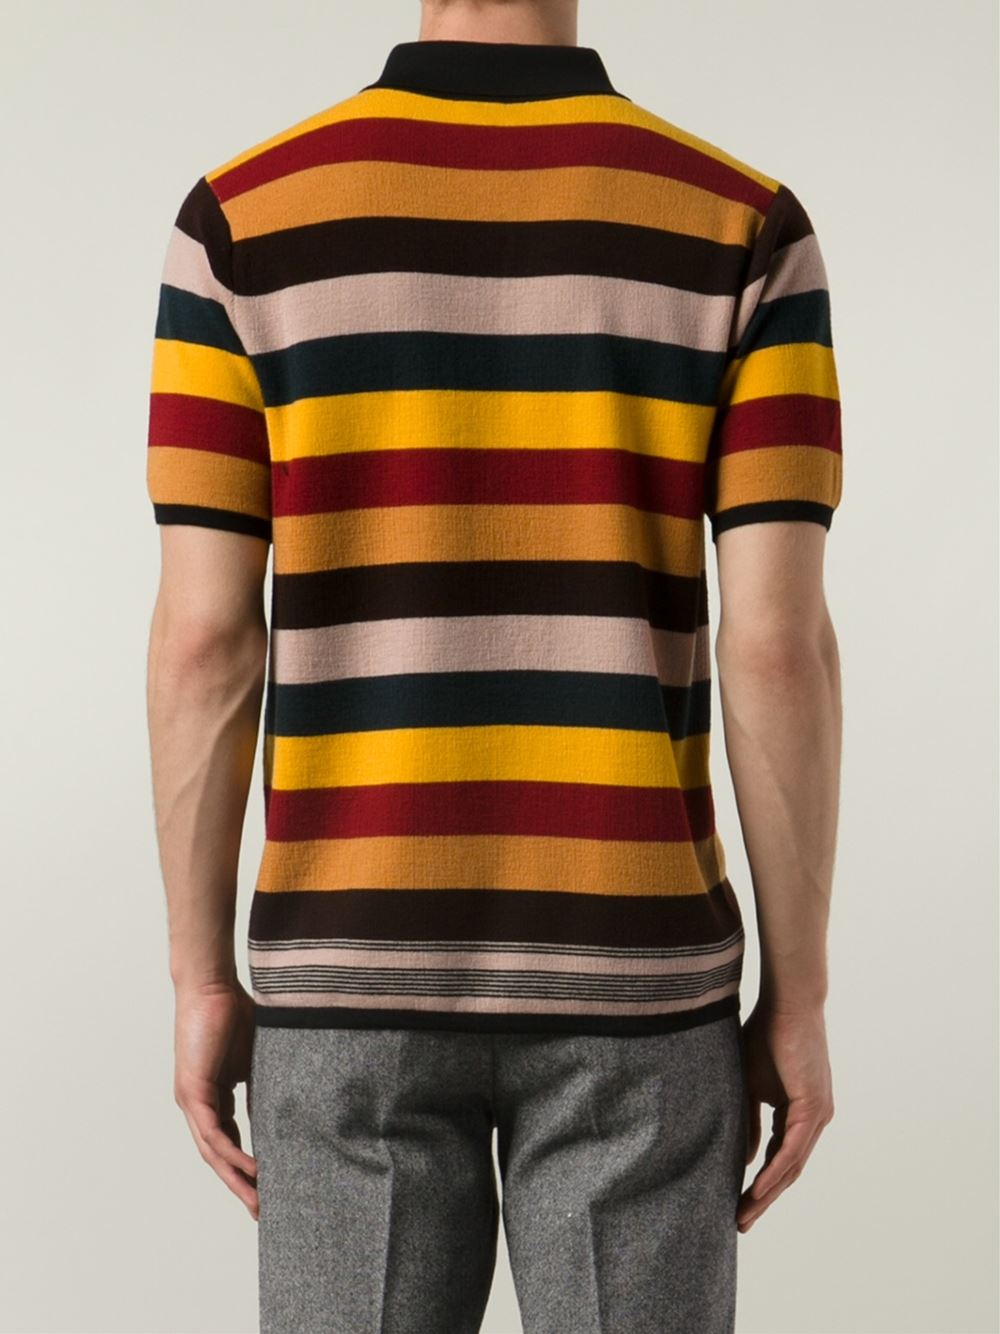 Loewe Striped Polo Shirt for Men - Lyst